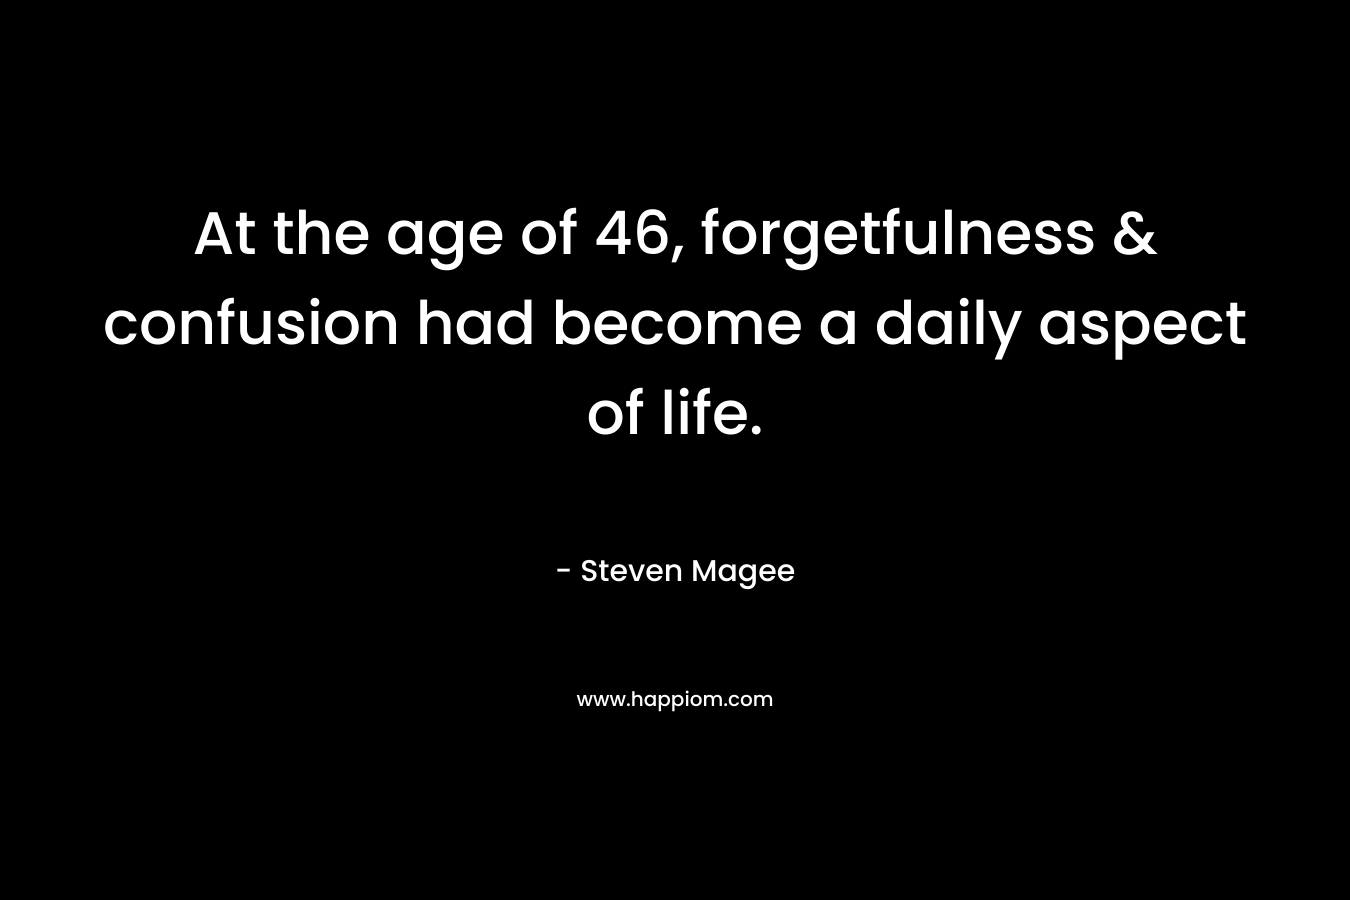 At the age of 46, forgetfulness & confusion had become a daily aspect of life. – Steven Magee